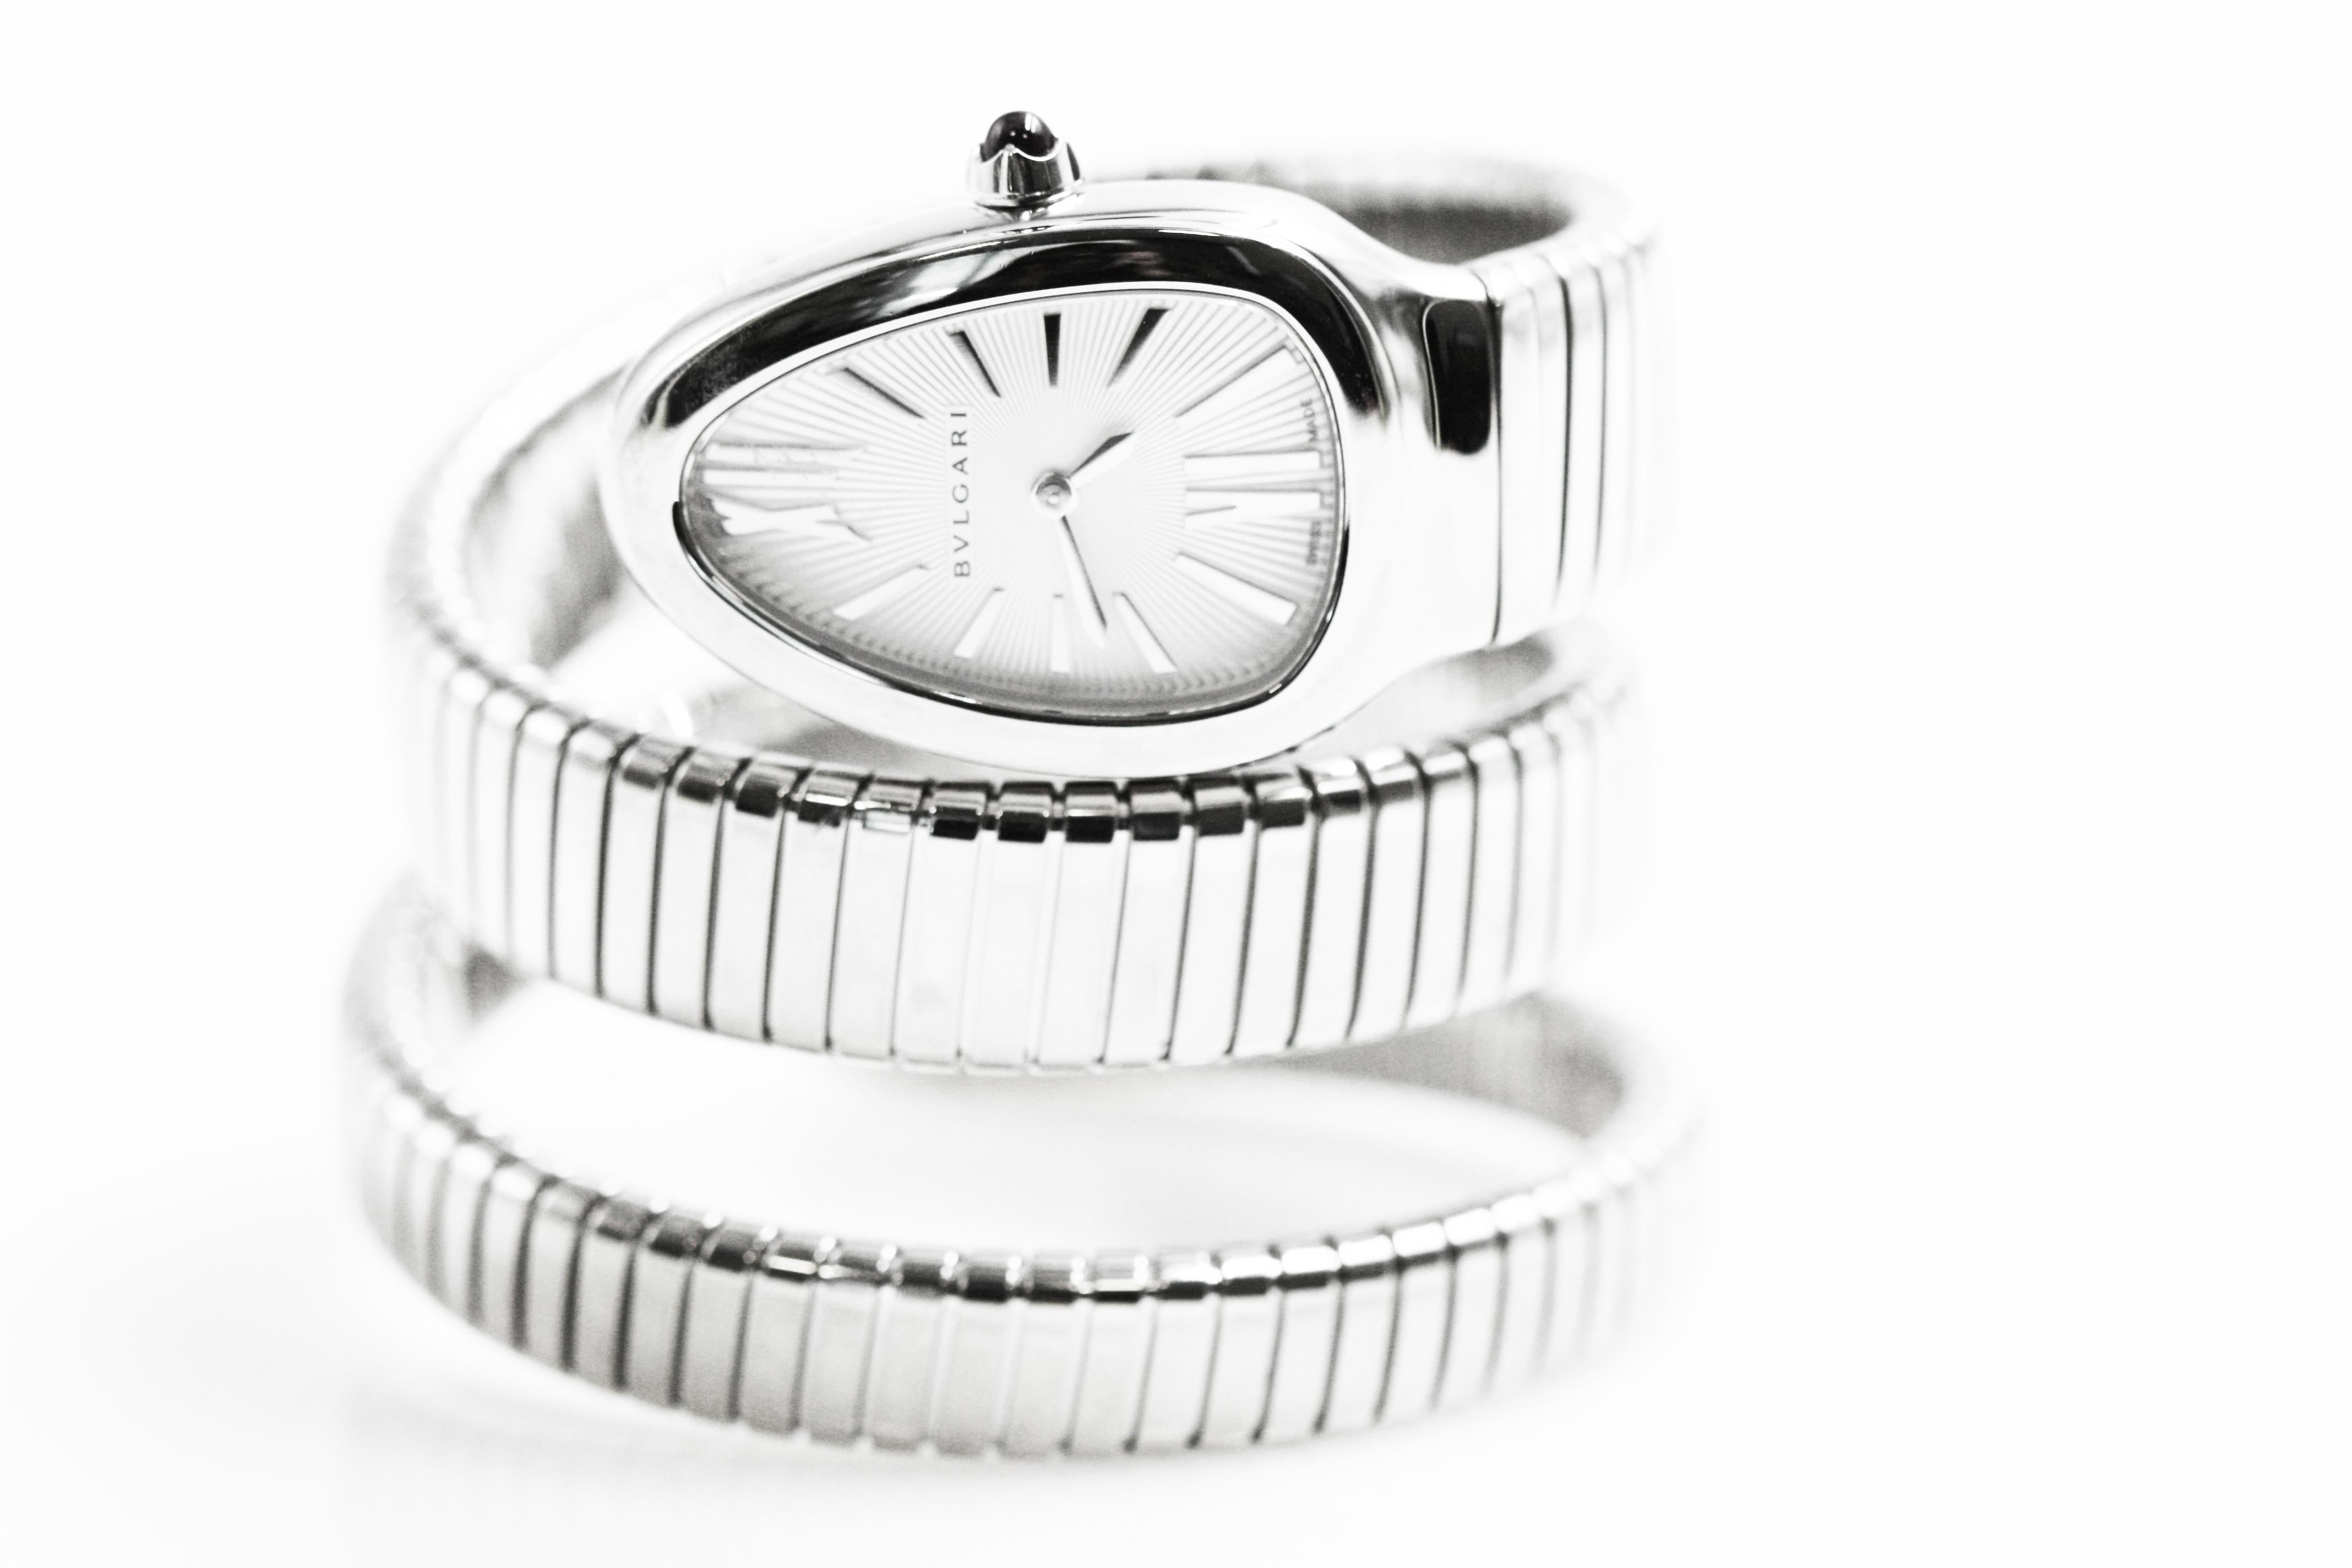 Bvlgari Serpenti Tubogas Watch In Excellent Condition For Sale In New York, NY